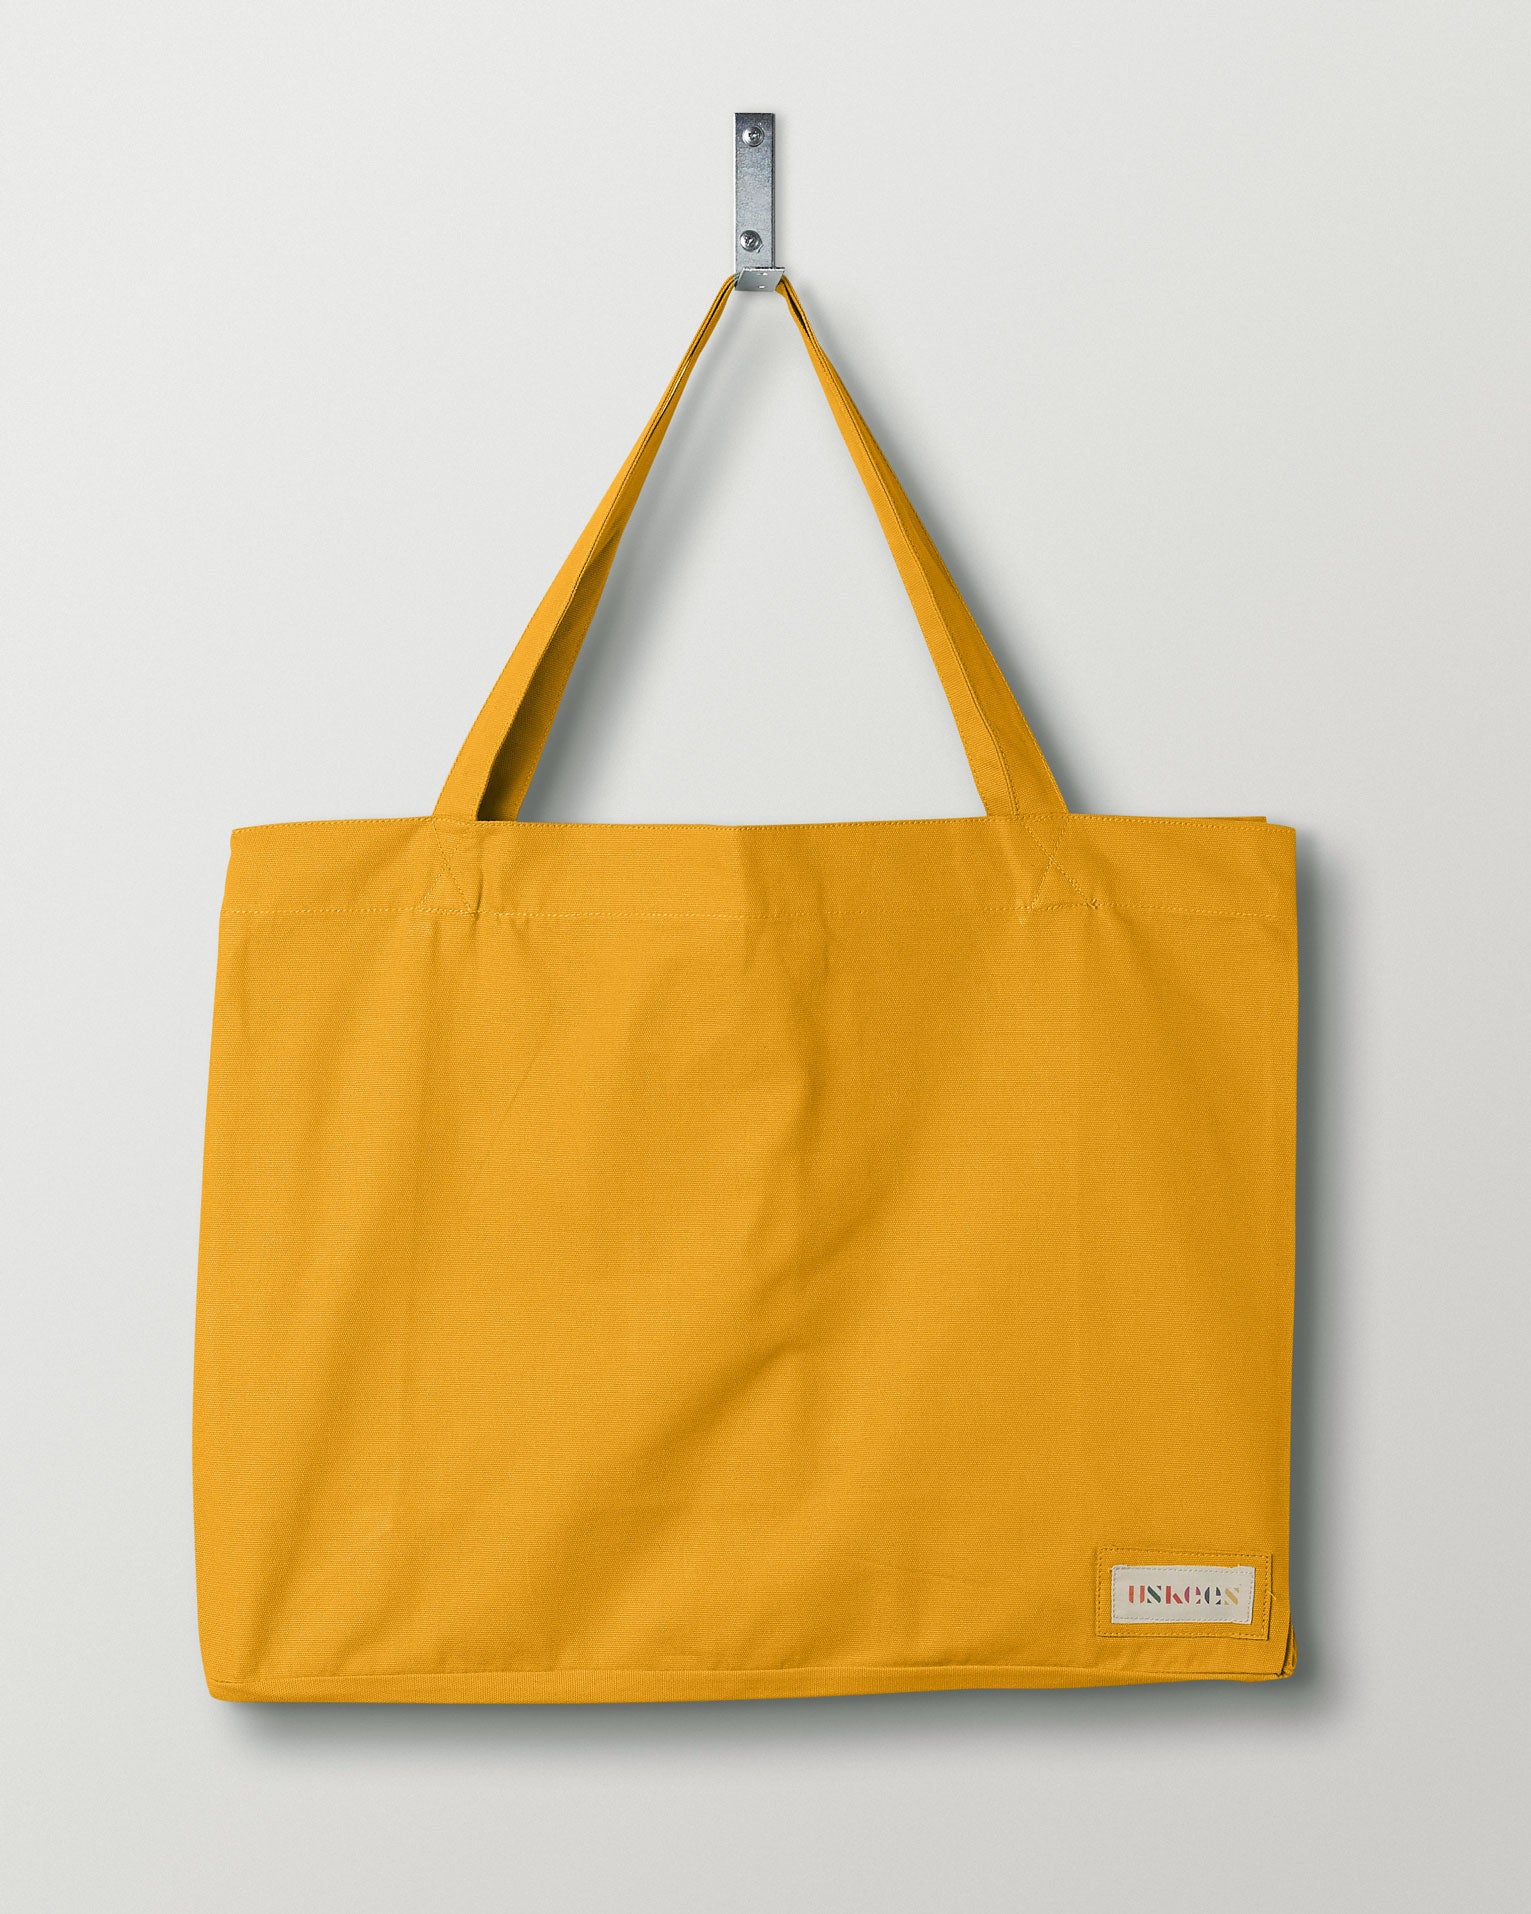 Full, flat view of Uskees #4001, large yellow tote bag, showing twin handles and Uskees woven logo. 